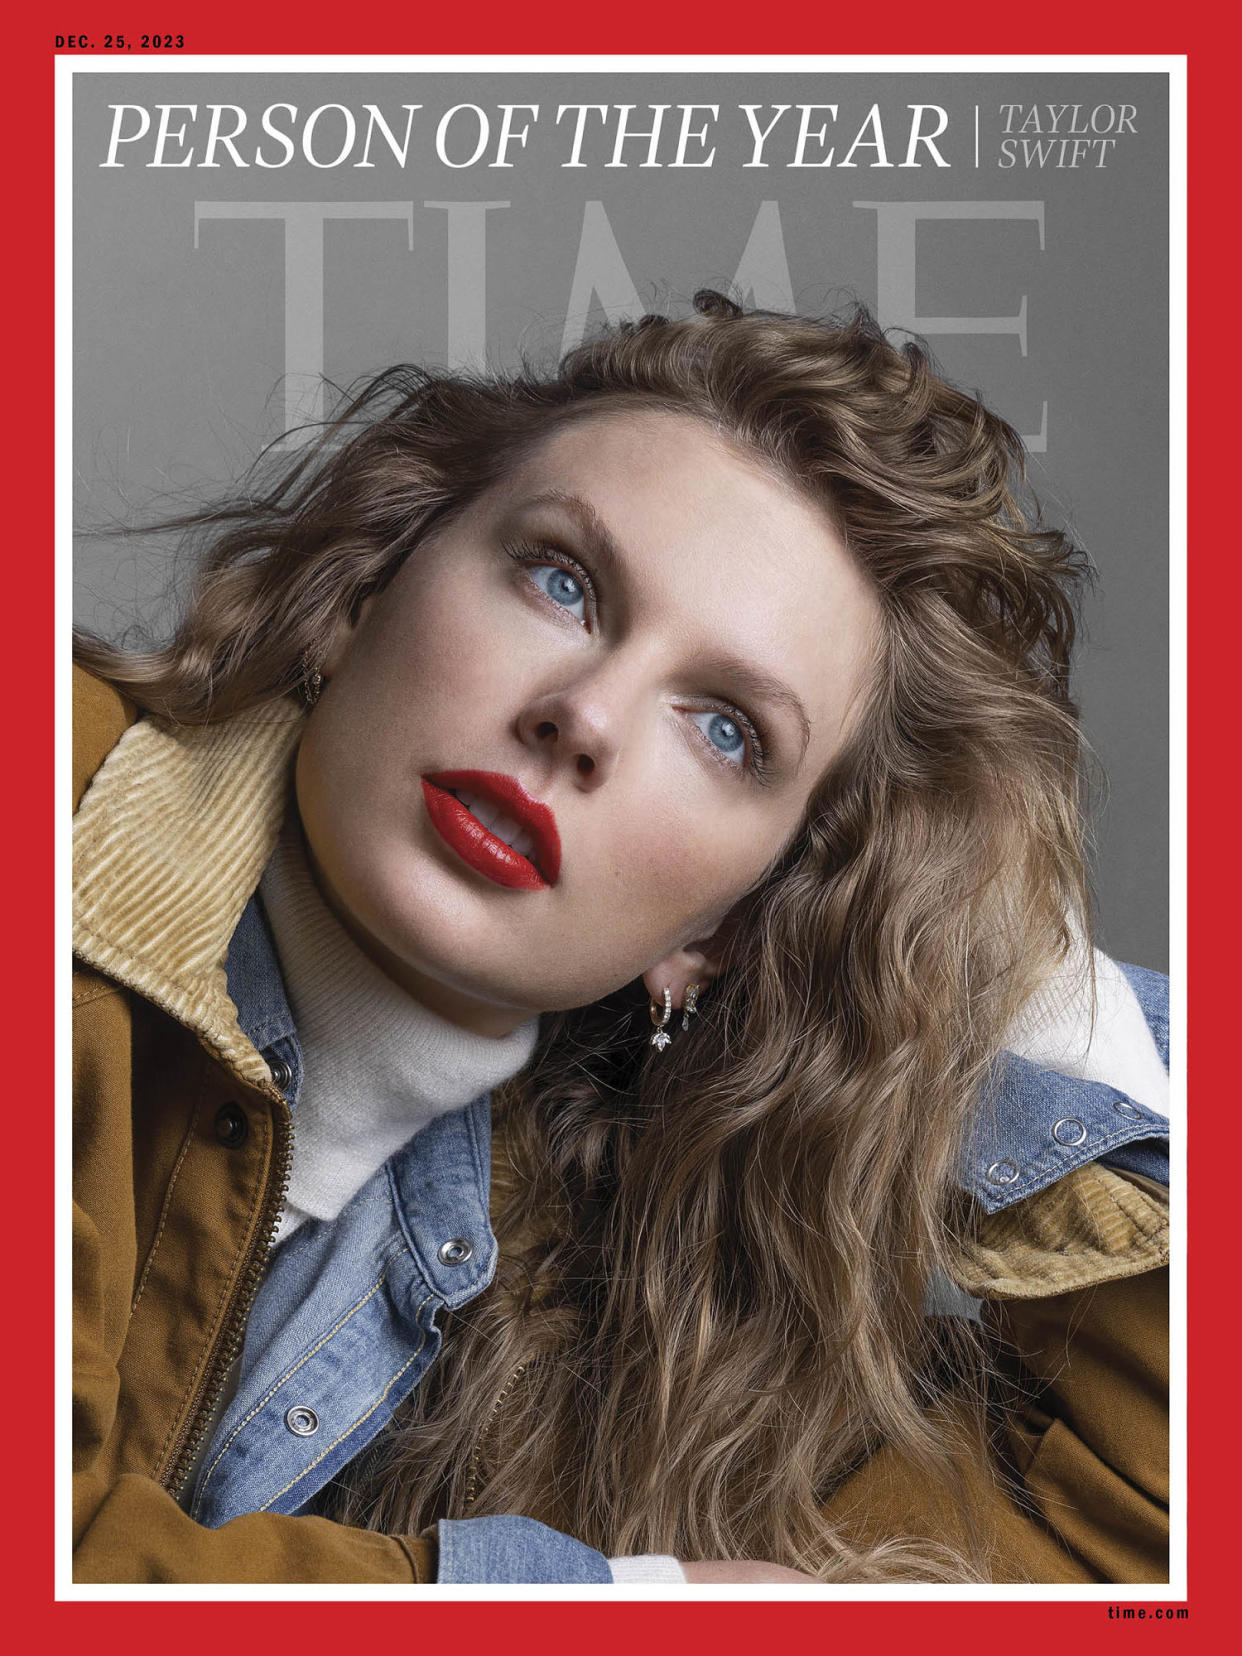 Taylor Swift TIME person of the year (Inez van Lamsweerde and Vinoodh Matadin for Time)